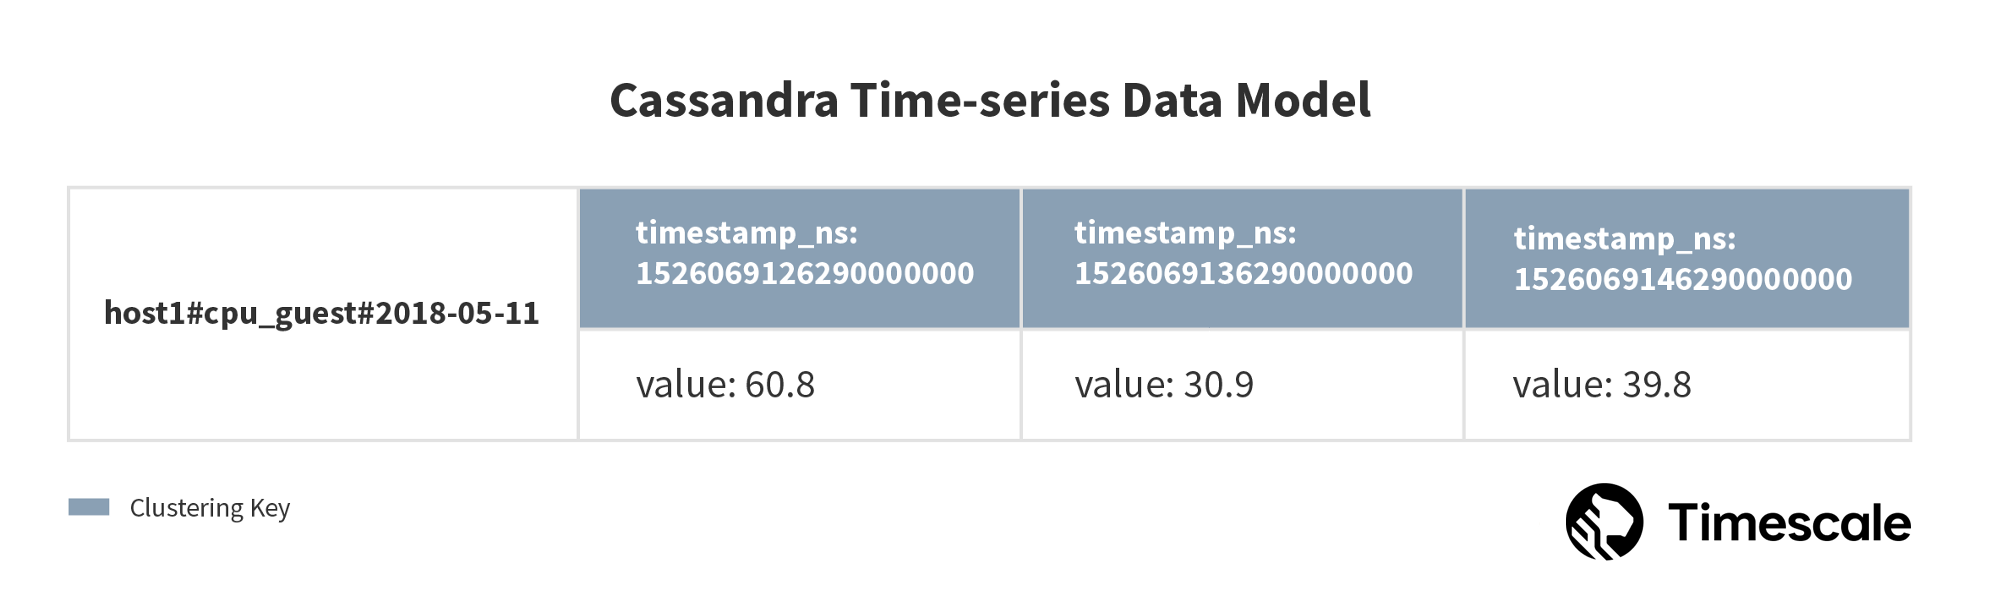 A Cassandra data model with measurements stored over time